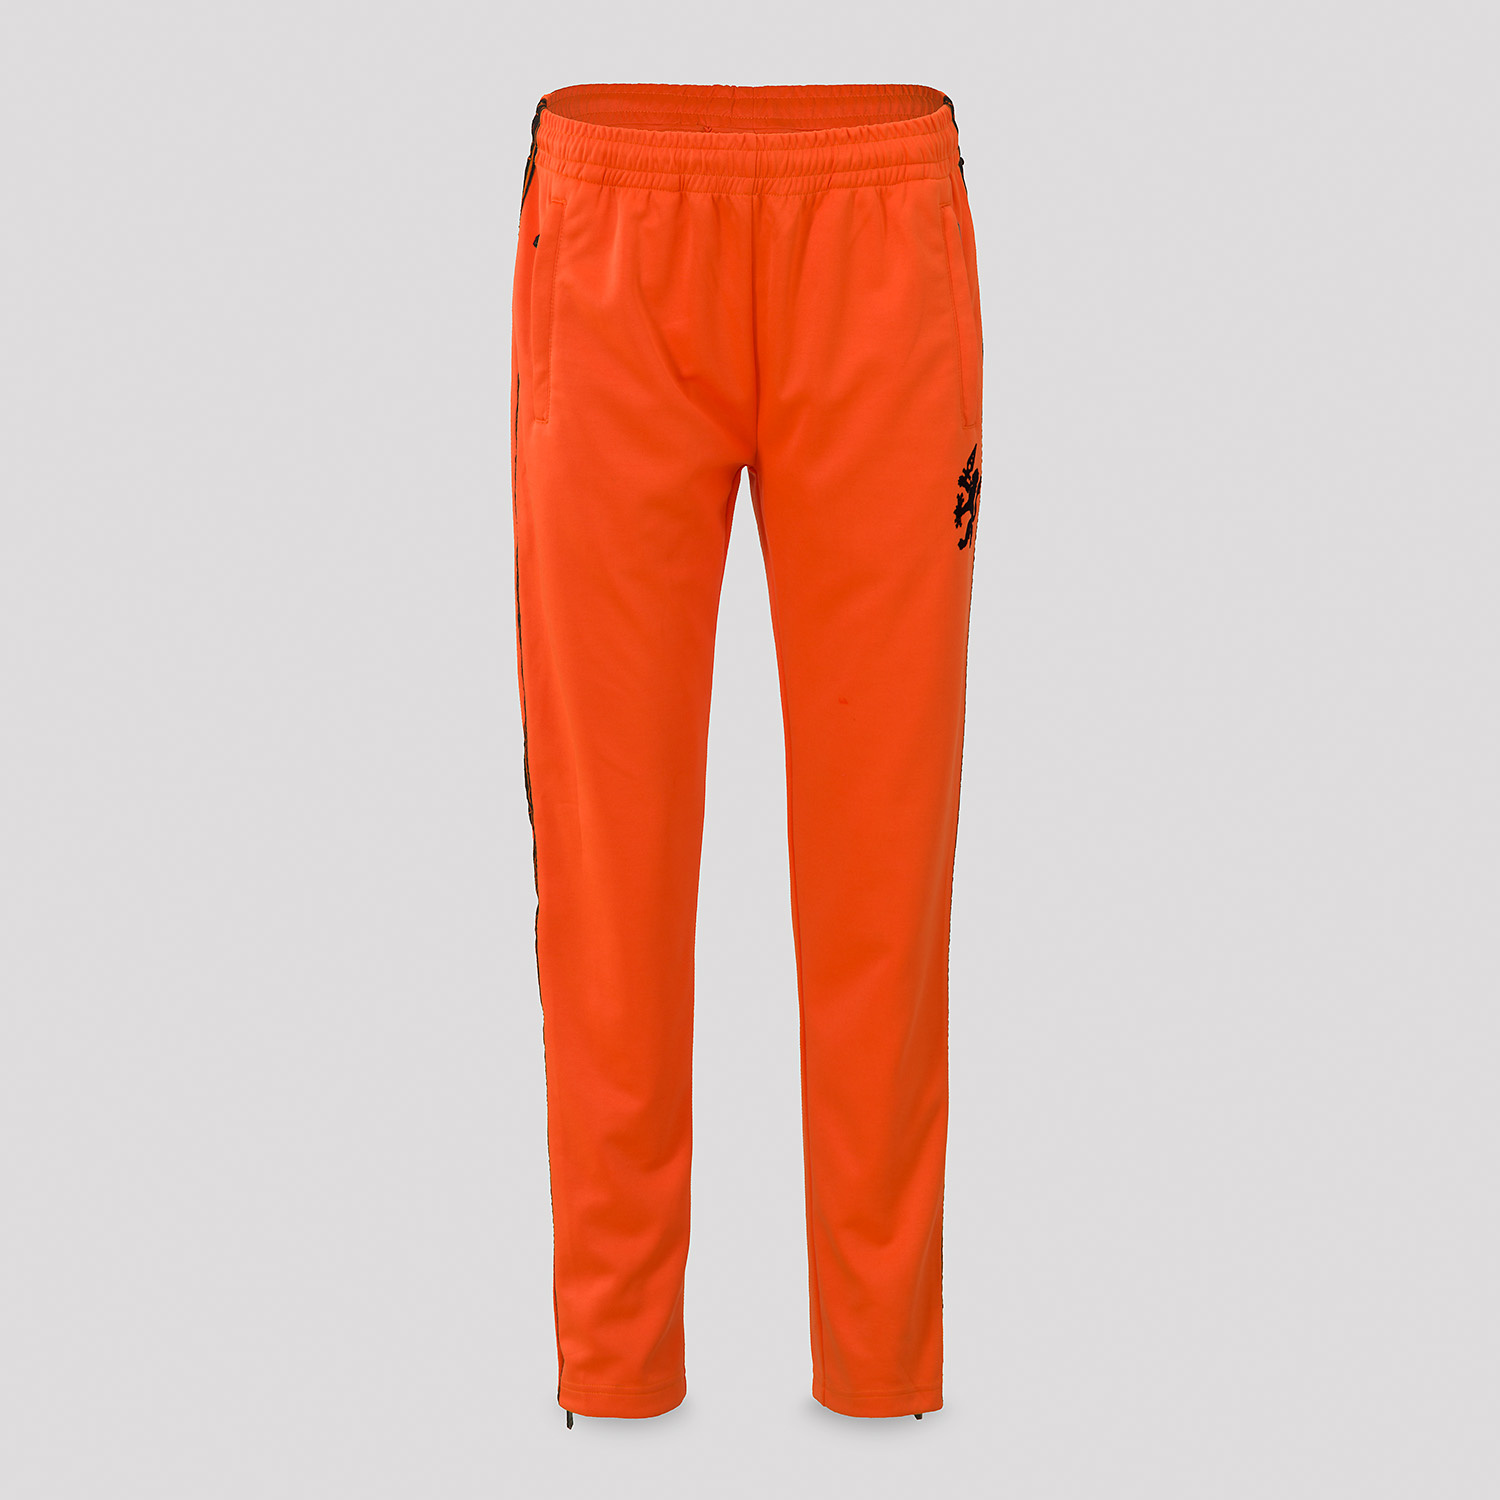 Buy online Black Solid Full Length Track Pant from Sports Wear for Men by  Leebonee for 909 at 55 off  2023 Limeroadcom